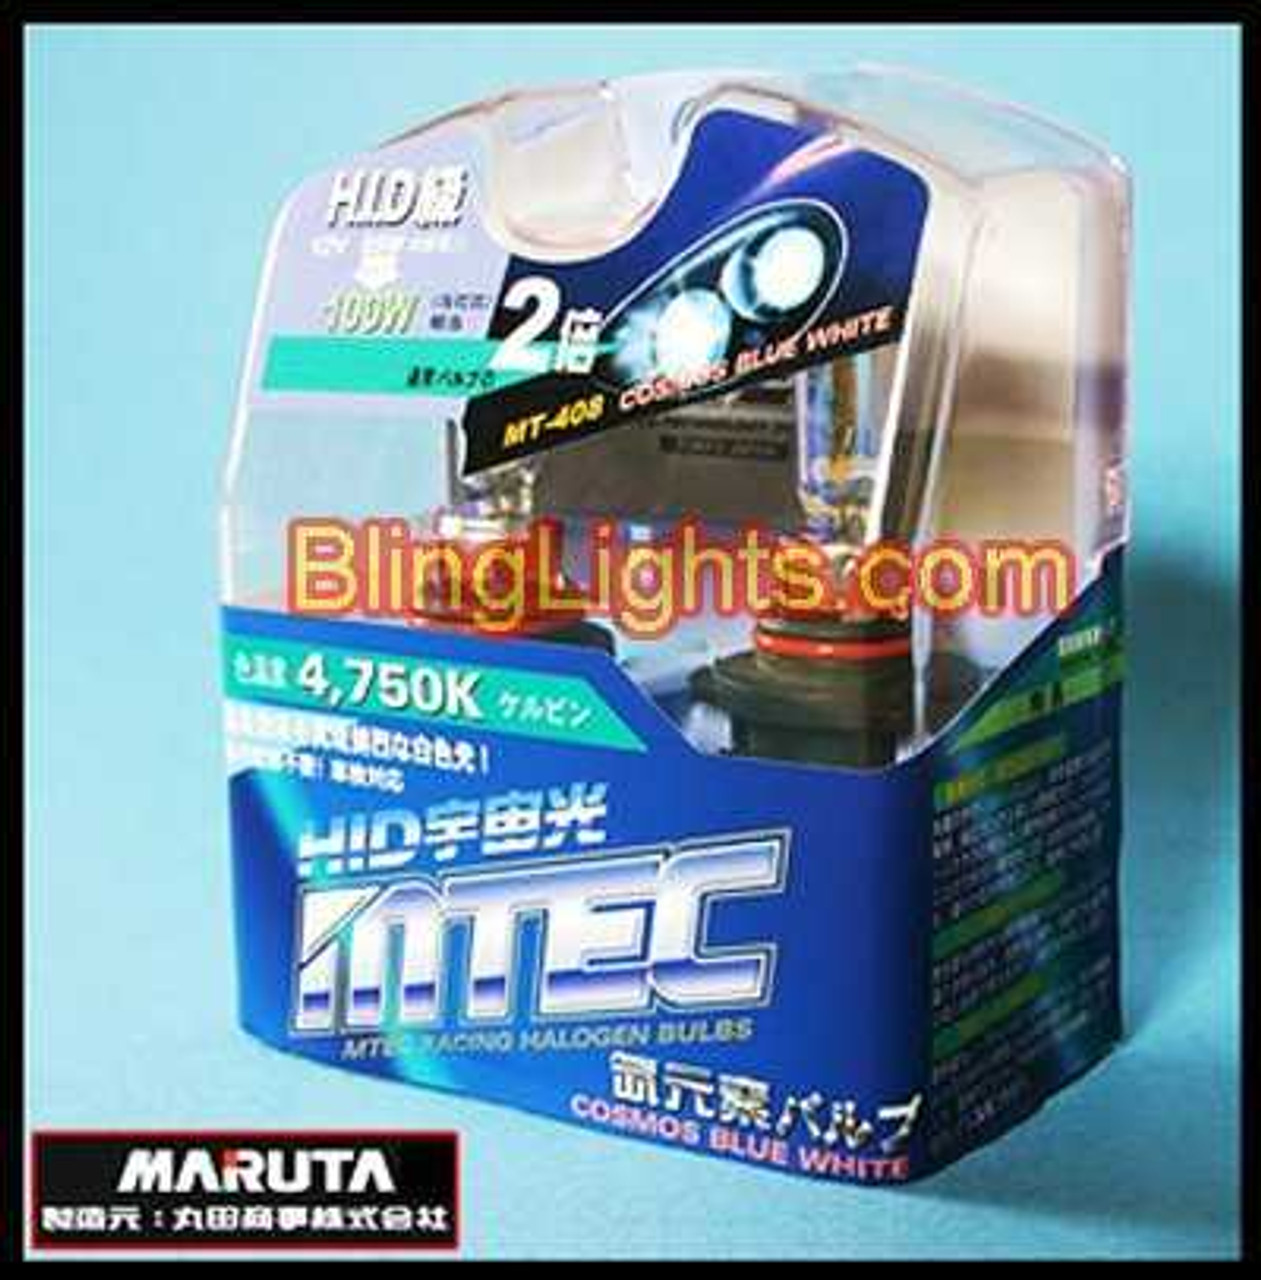 Mitsubishi Adventure Bright White Replacement Light Bulbs for Headlamps Headlights Head Lamps Lights